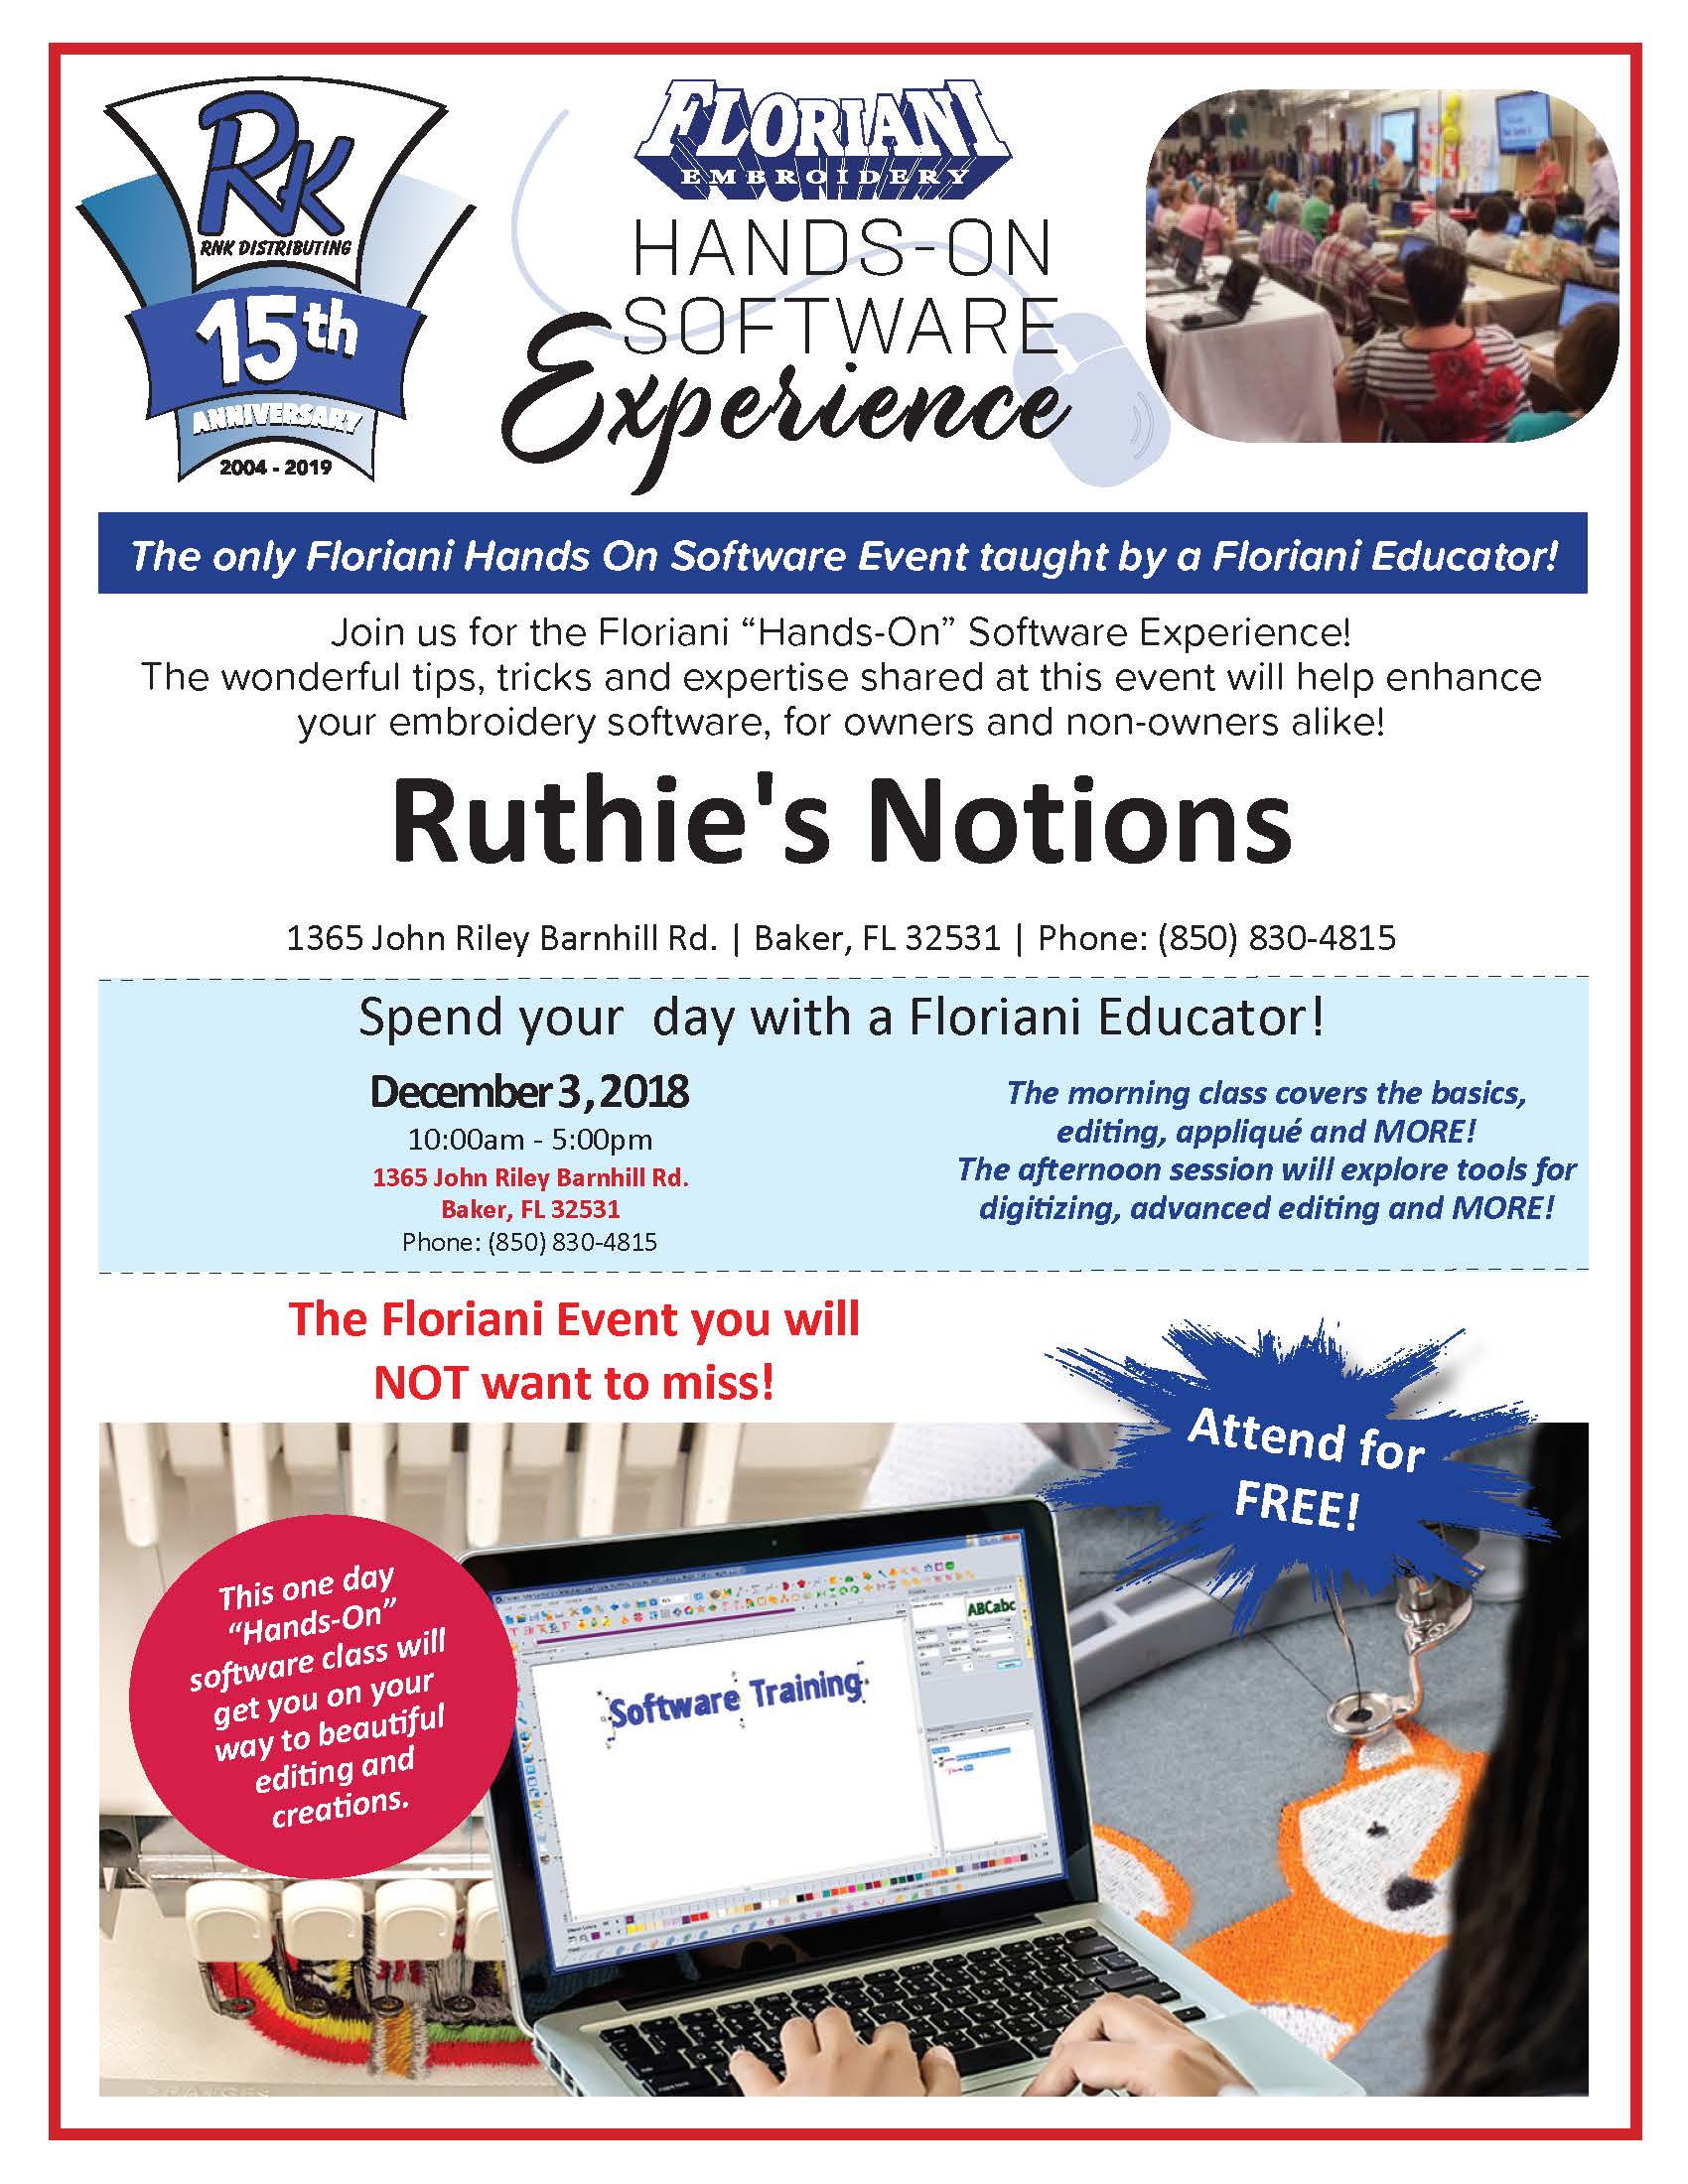 Ruthie’s Notions -Floriani Event